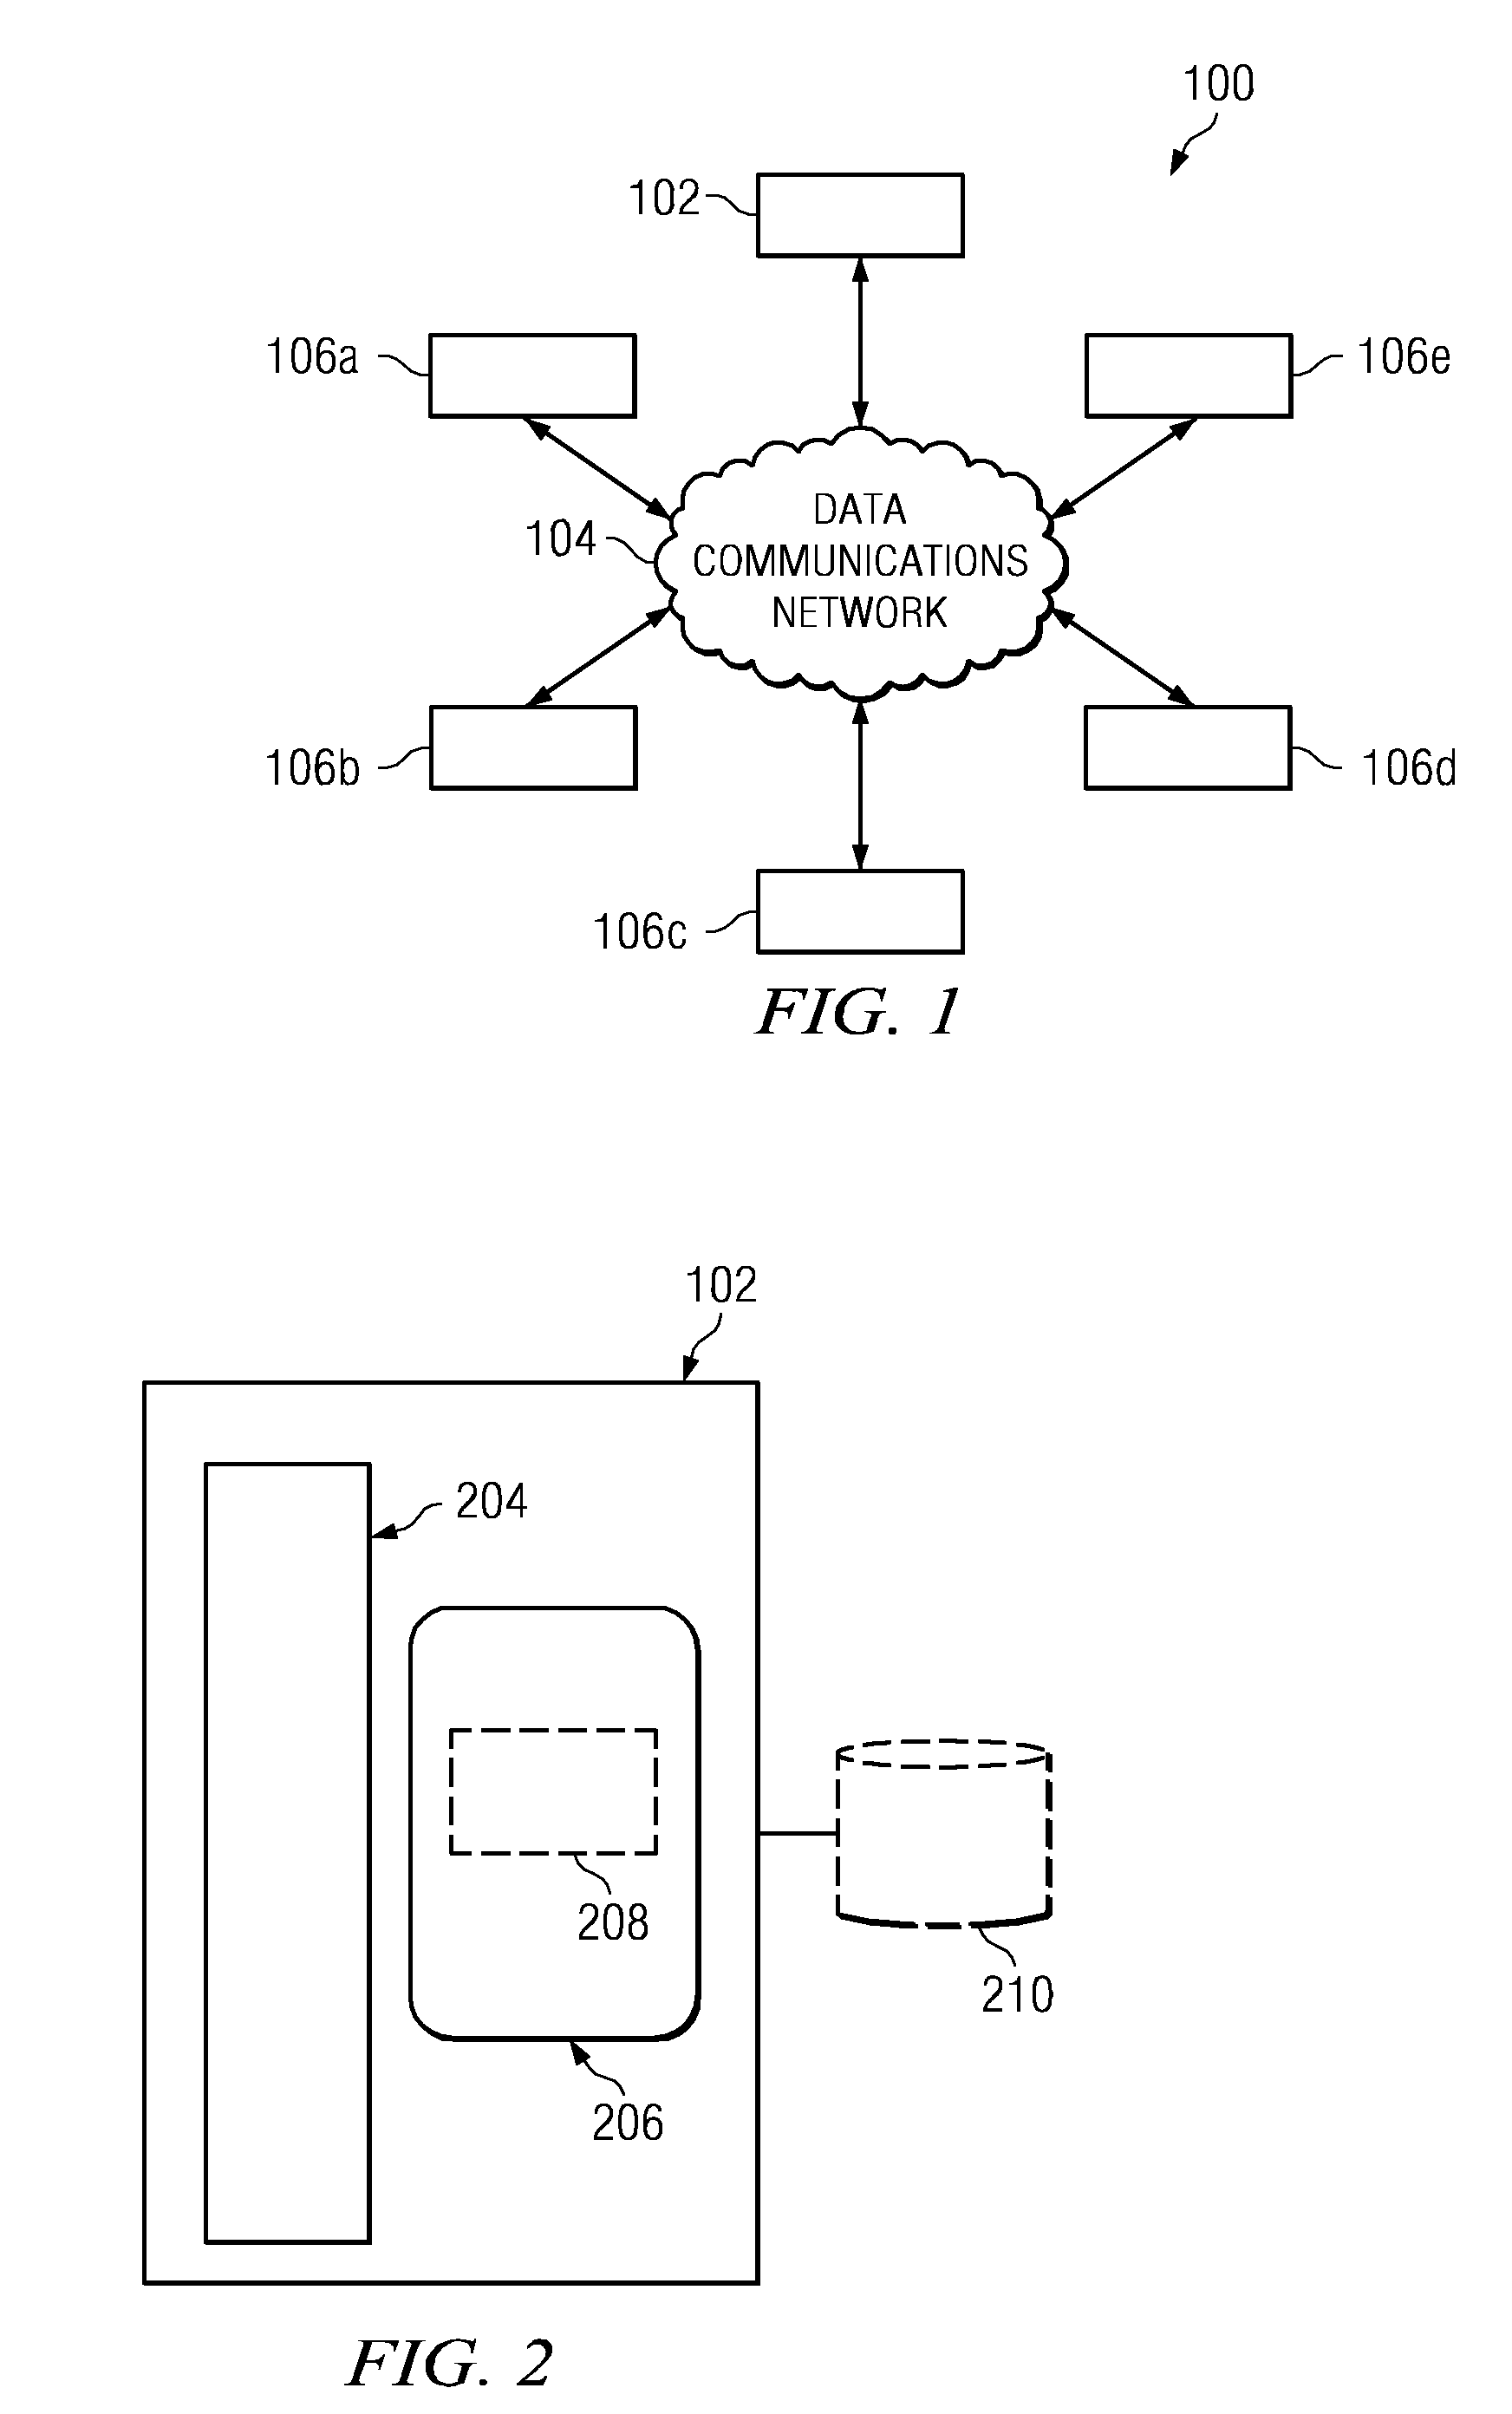 System and methods for protecting confidential information on network sites based on security awareness